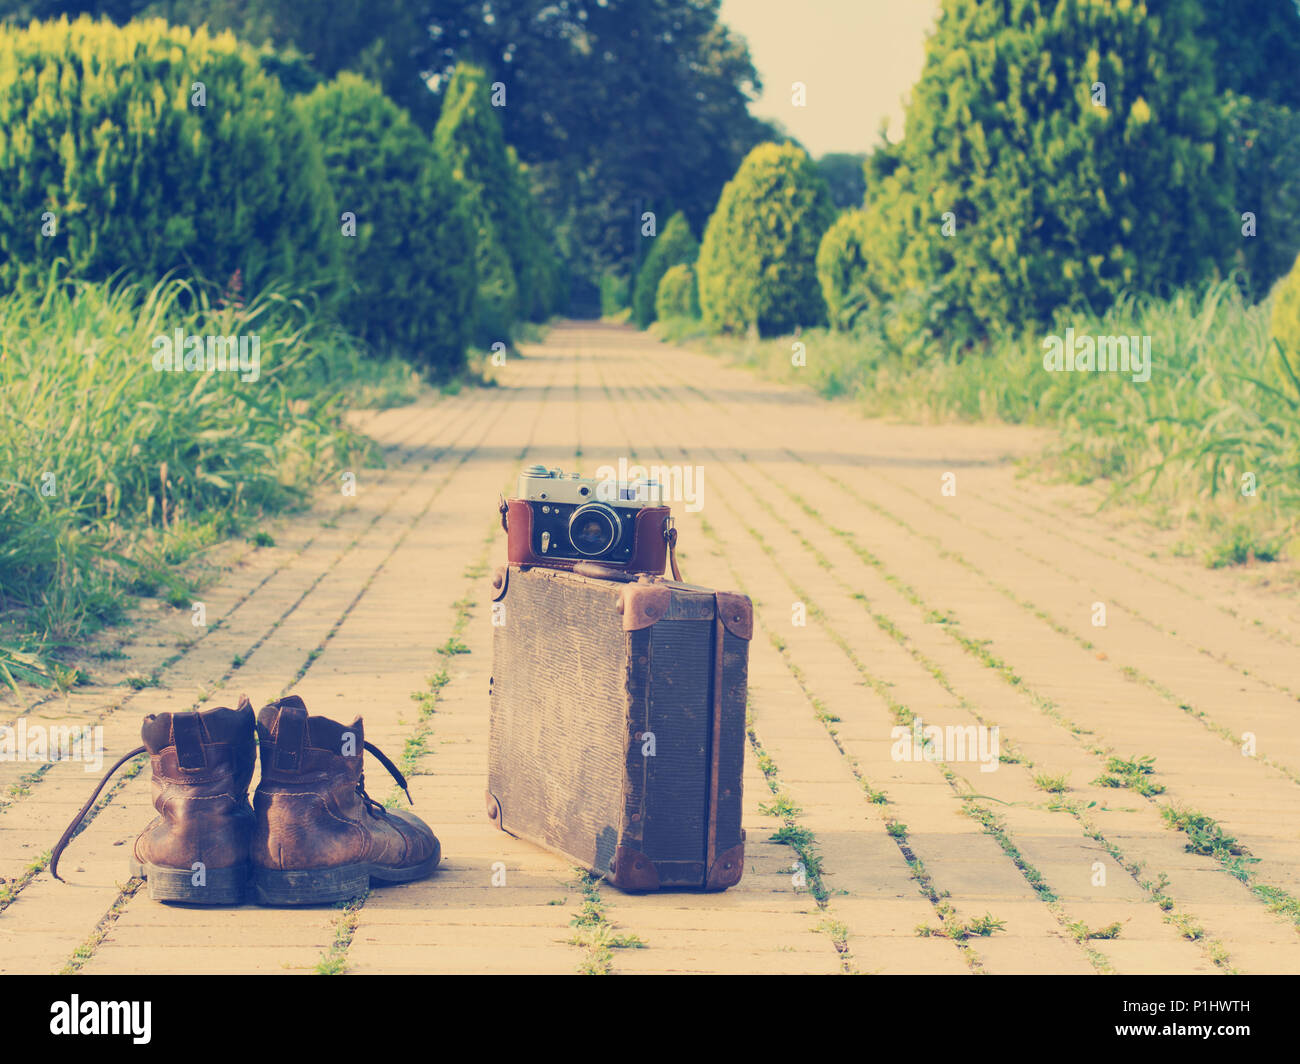 Ankle boots next to an old cardboard suitcase with a film camera on it. A yellow brick road, grass, and trees are visible in a blurry background. Stock Photo